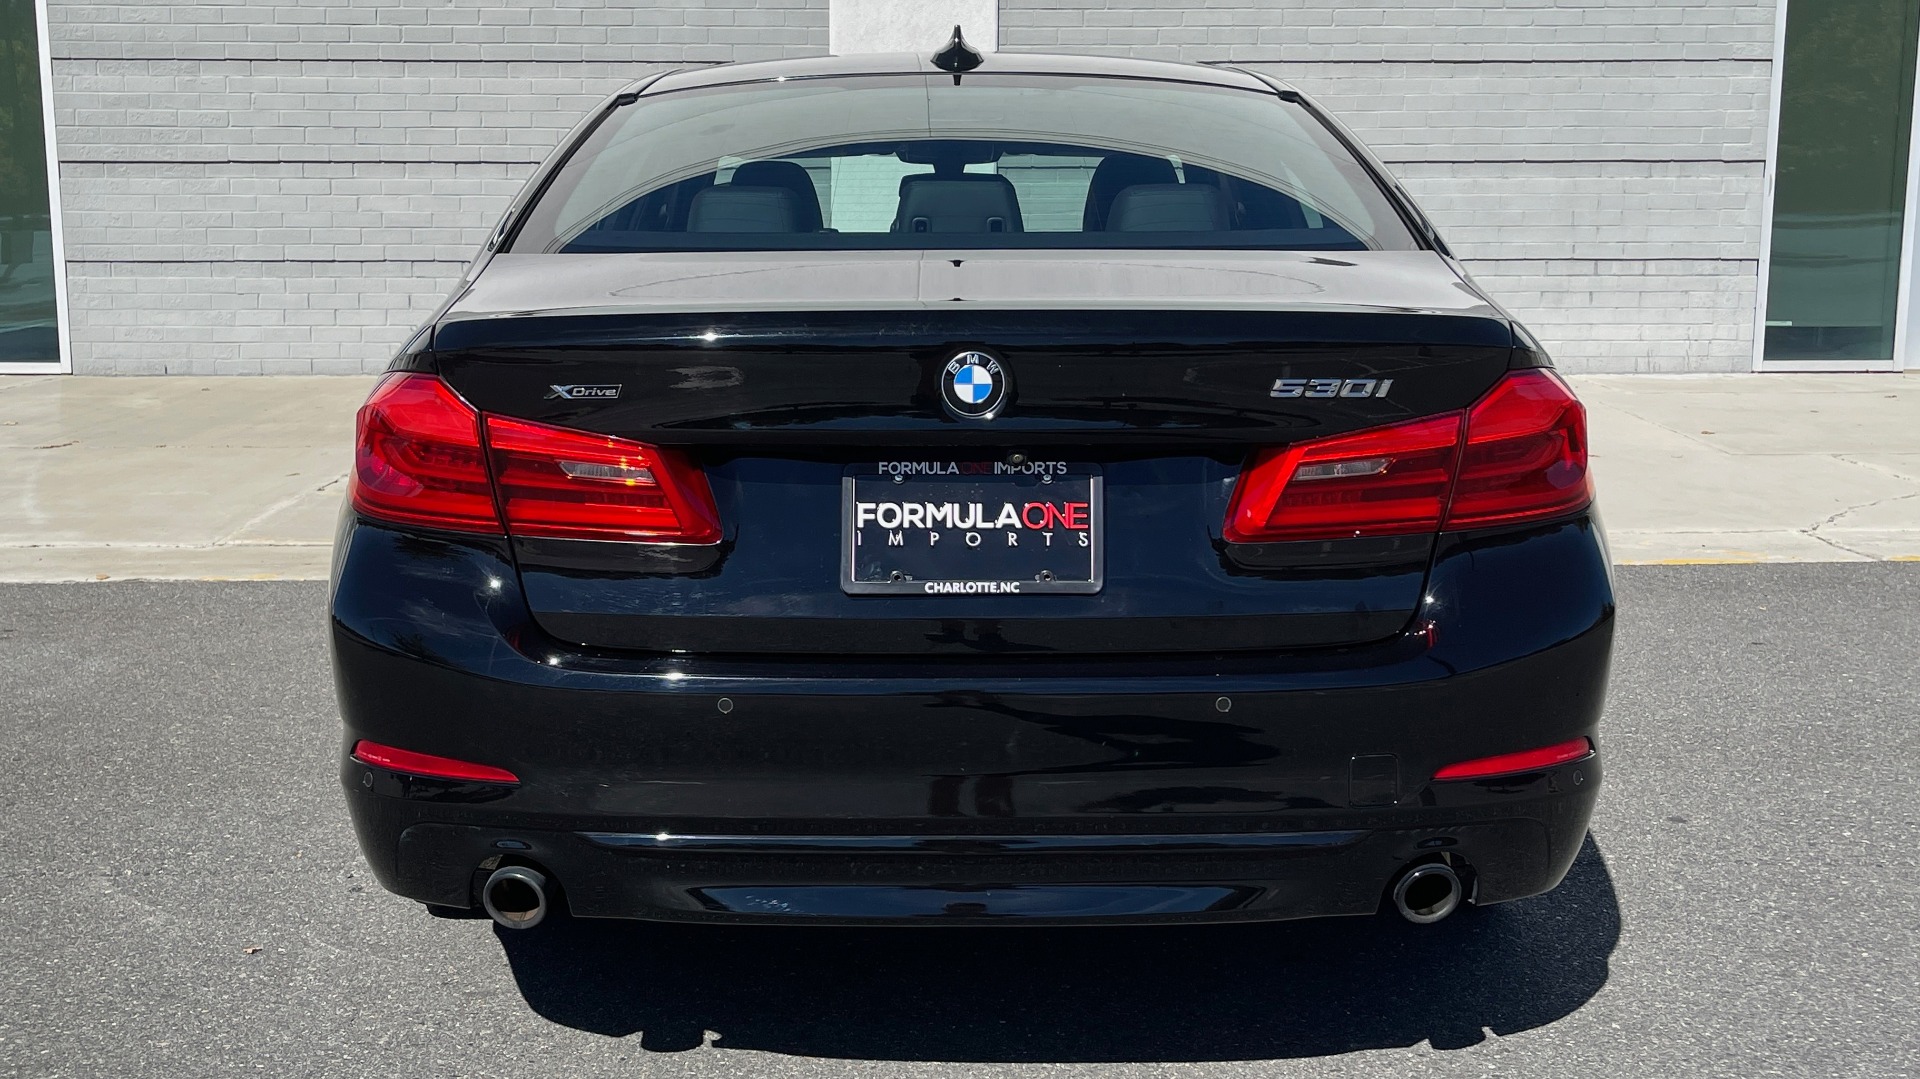 Used 2018 BMW 5 SERIES 530I XDRIVE 2.0L / 8-SPD AUTO / NAV / SUNROOF / REARVIEW for sale $33,295 at Formula Imports in Charlotte NC 28227 20